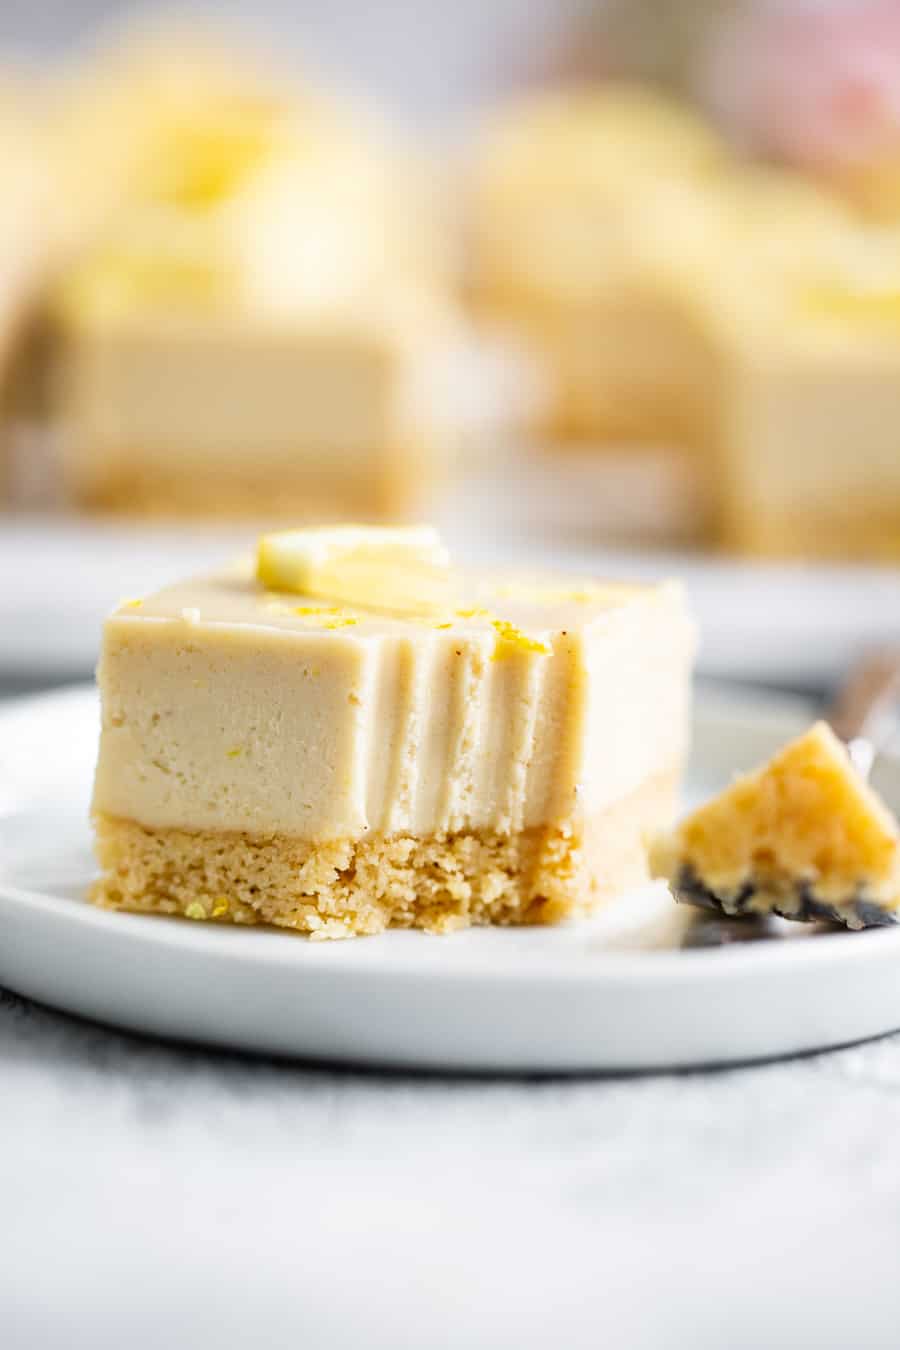 These tart, sweet, paleo lemon bars have a sugar cookie crust and creamy cashew based lemon layer. This healthy spring dessert is totally dairy free, paleo, egg free with a vegan option. Great easy dessert for holidays like Mother’s Day and Easter. I used affordable paleo baking ingredients from ALDI to make all the flavors shine. #paleo #cleaneating #vegan #AD 